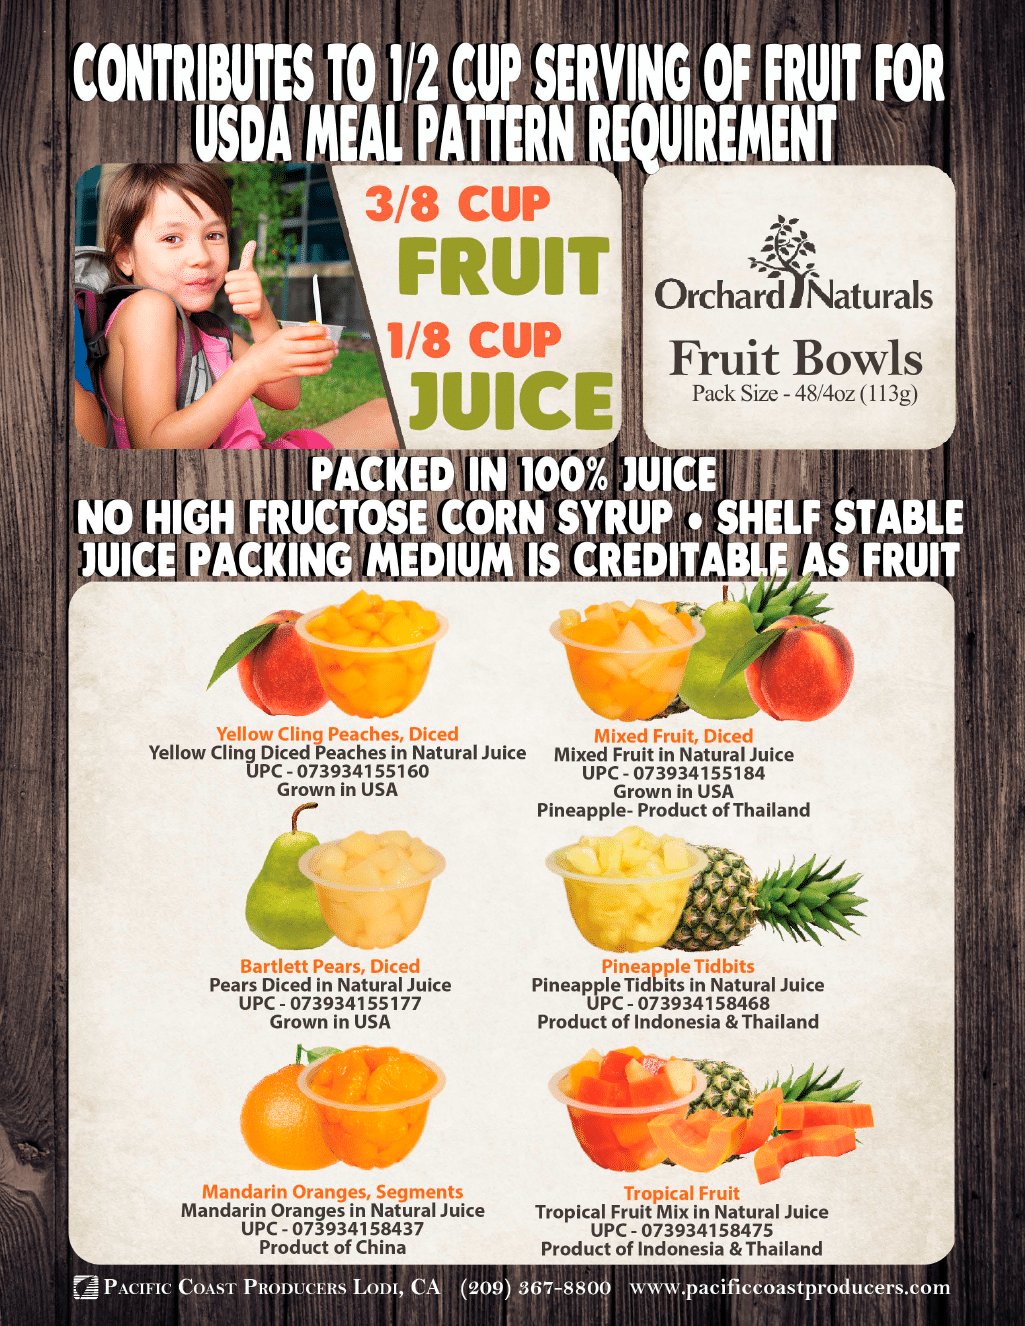 A flyer featuring a child holding a bowl of fruit in the Broker's Section.